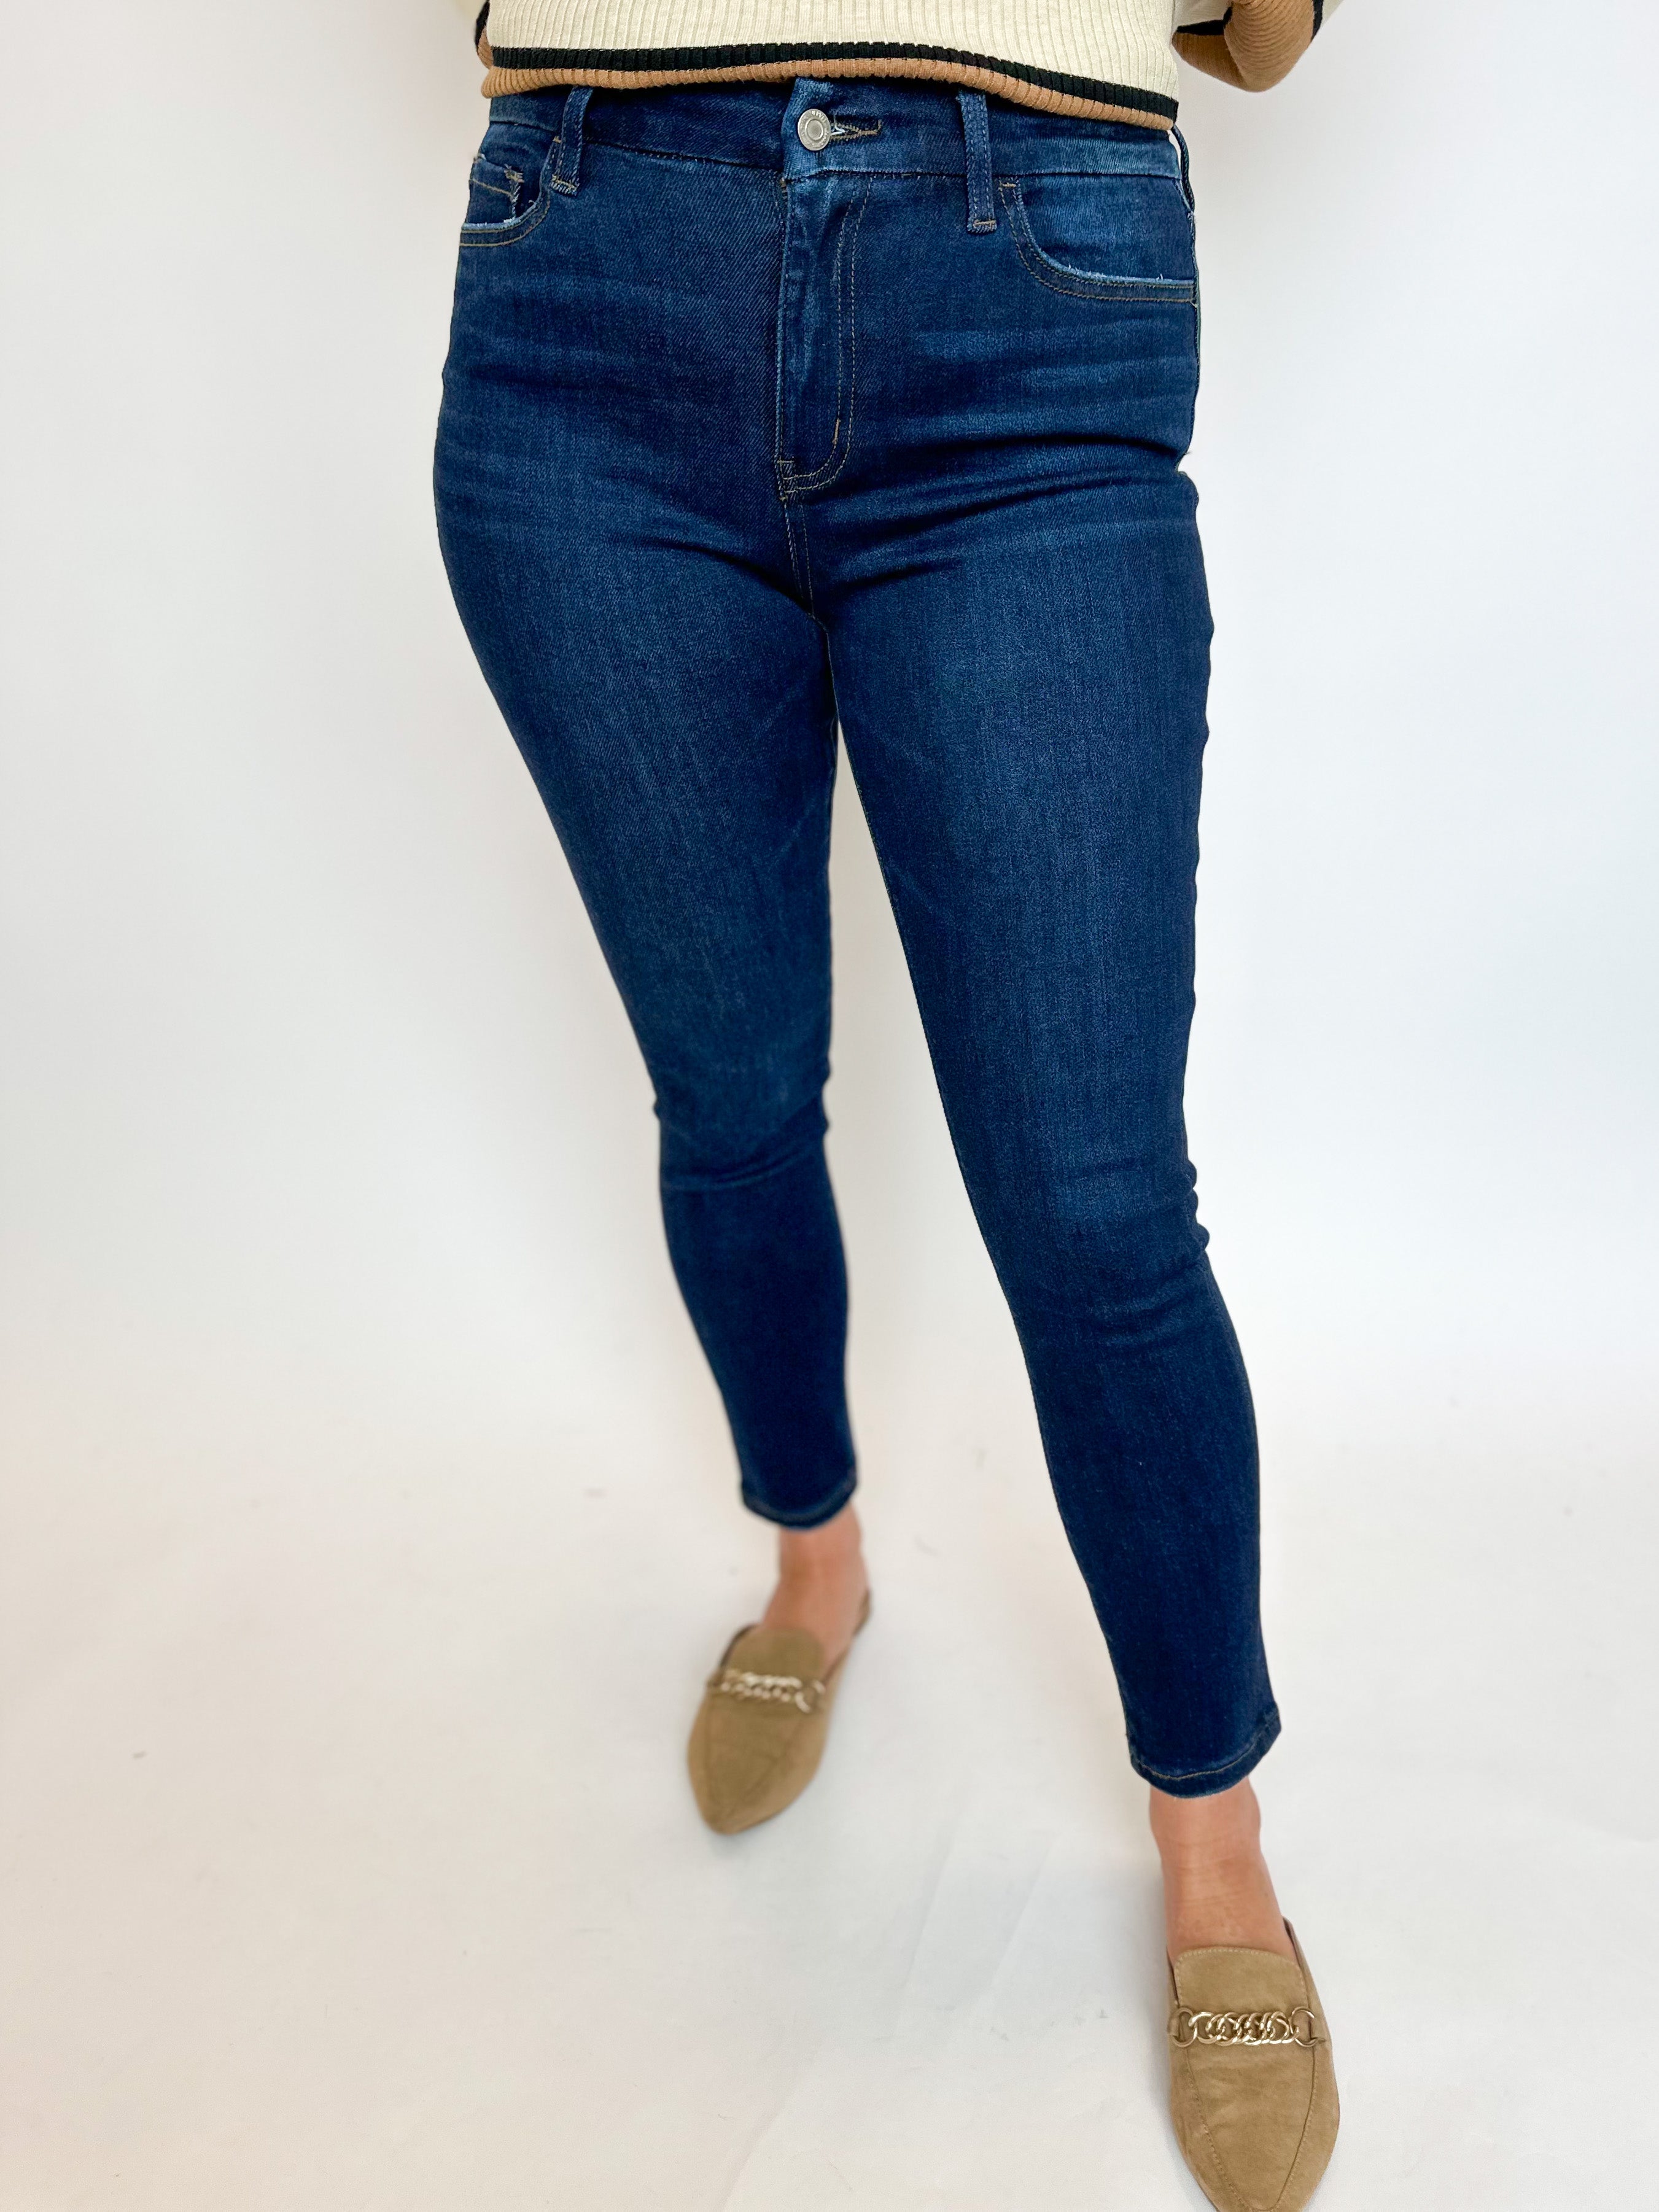 Vervet High Rise Dark Wash Skinny Jeans-400 Pants-VEVERT BY FLYING MONKEY-July & June Women's Fashion Boutique Located in San Antonio, Texas